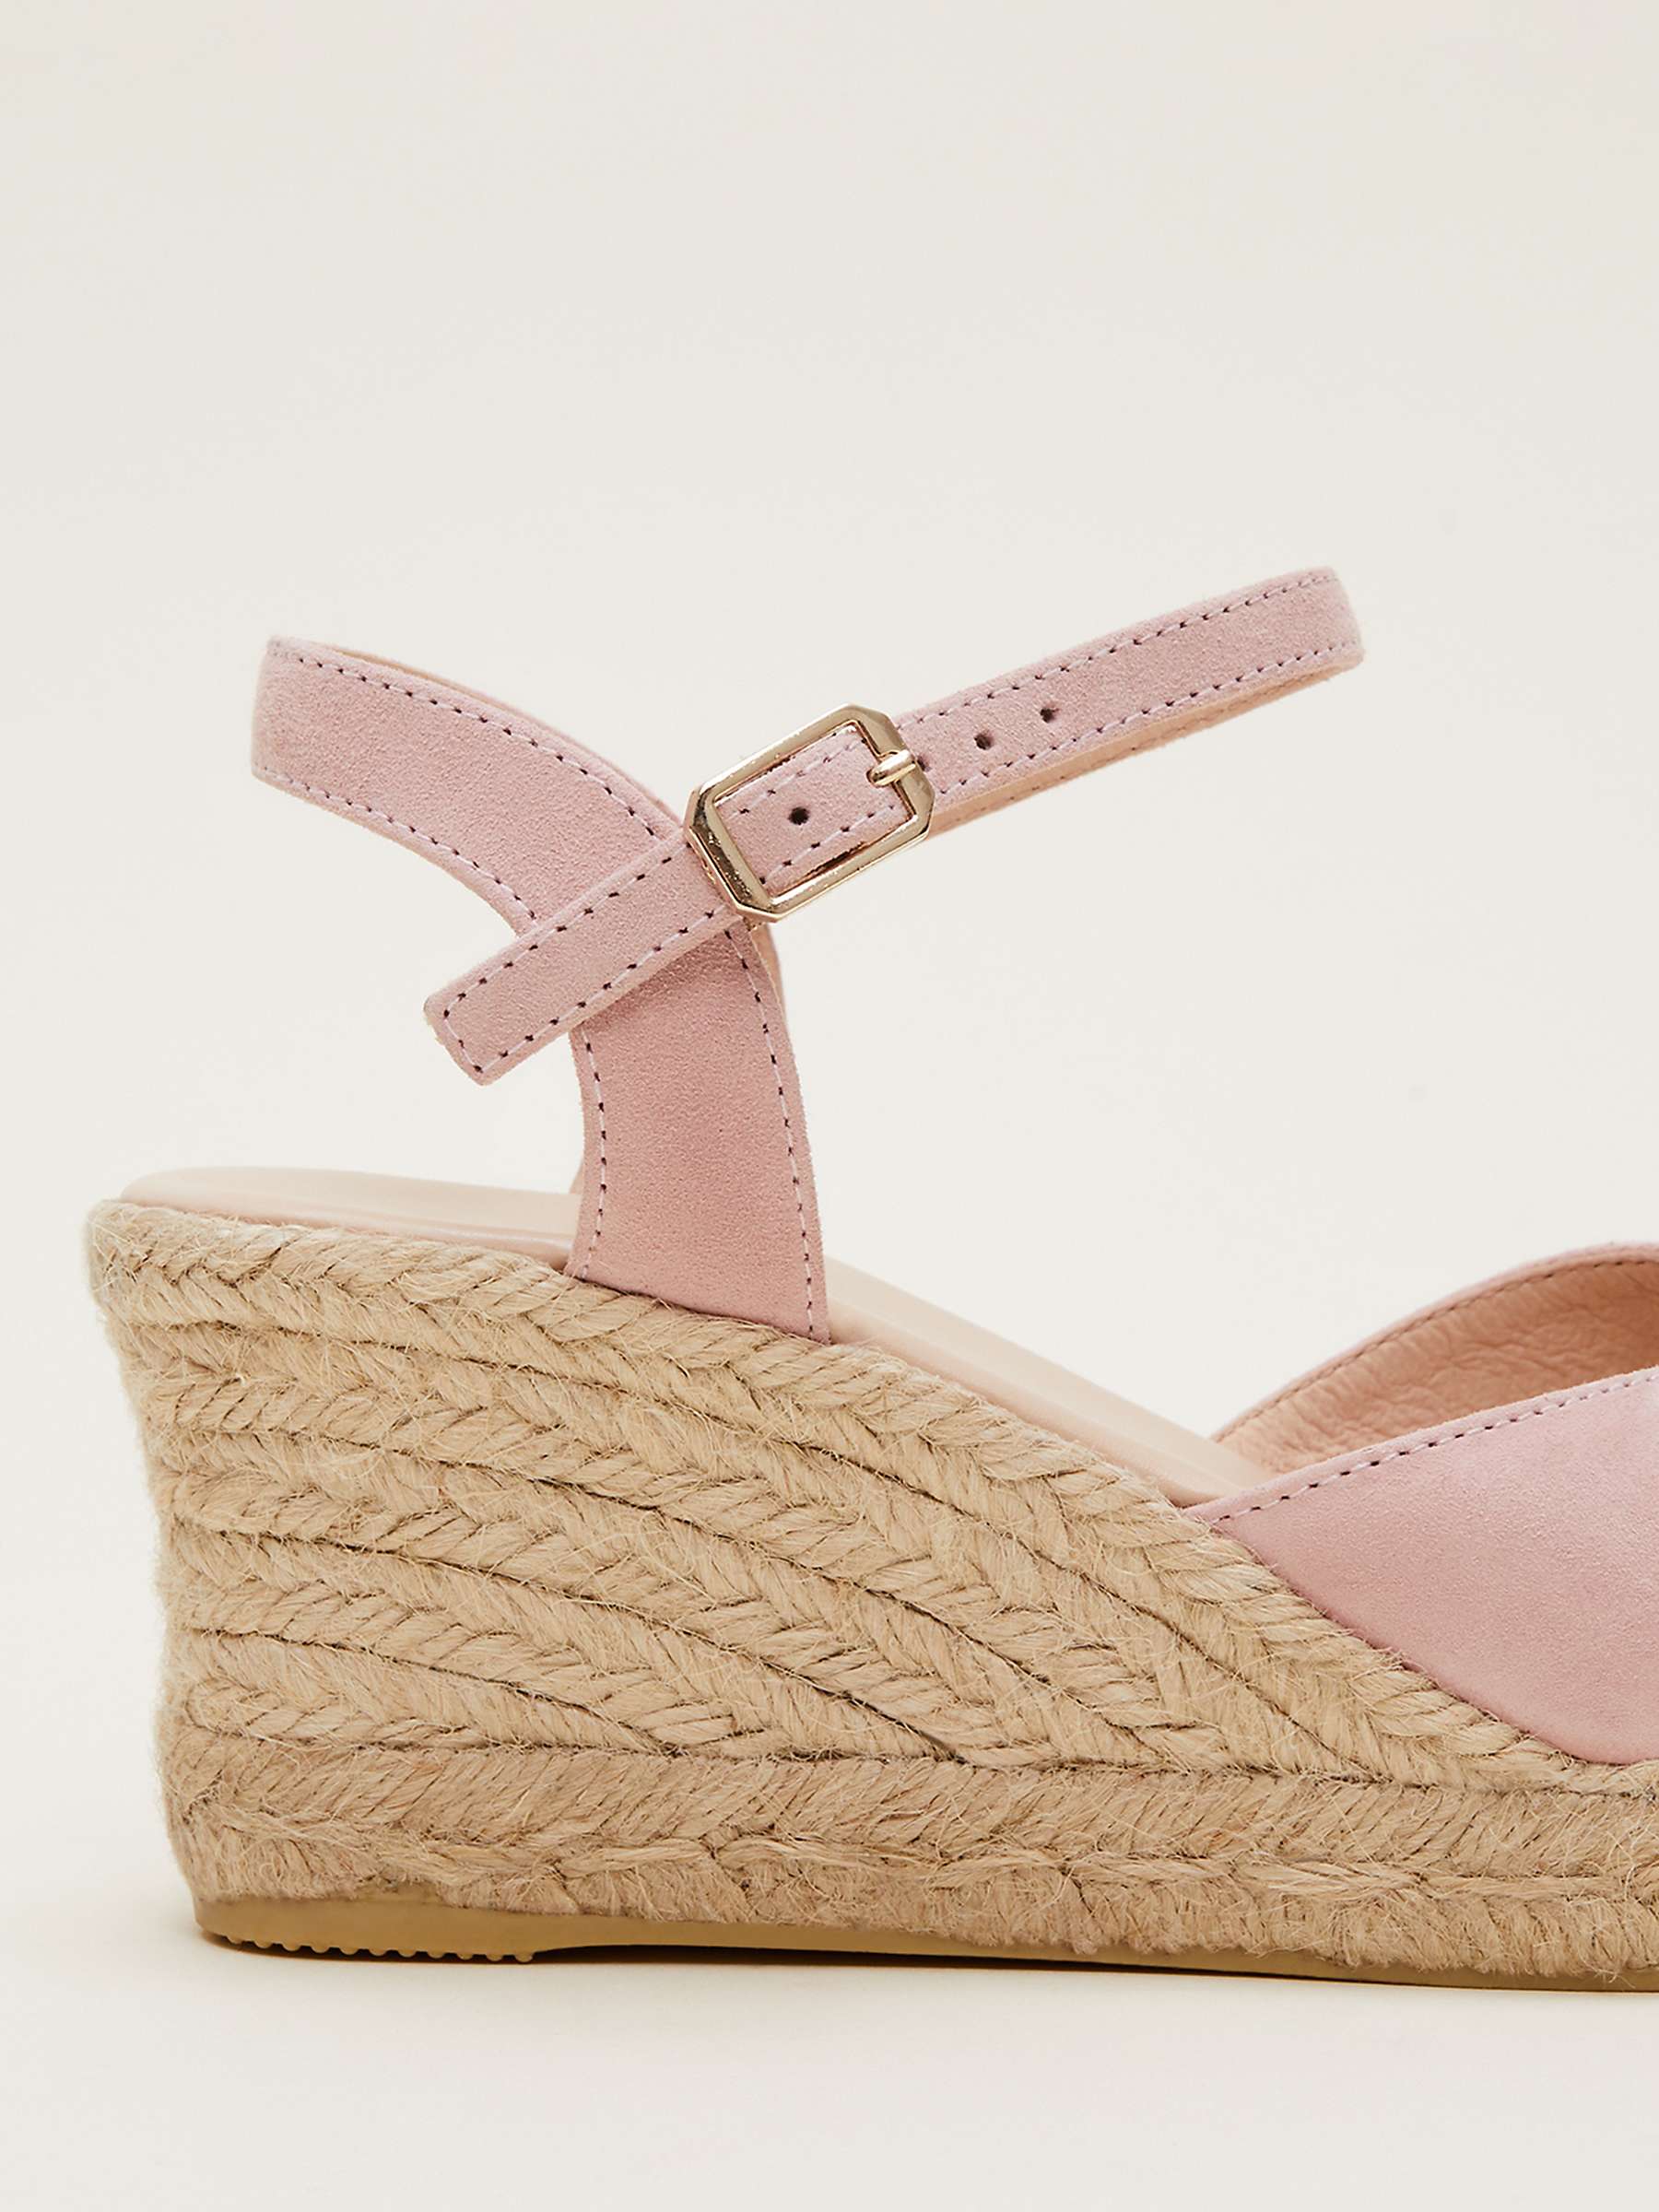 Buy Phase Eight Suede Espadrilles, Light Pink Online at johnlewis.com